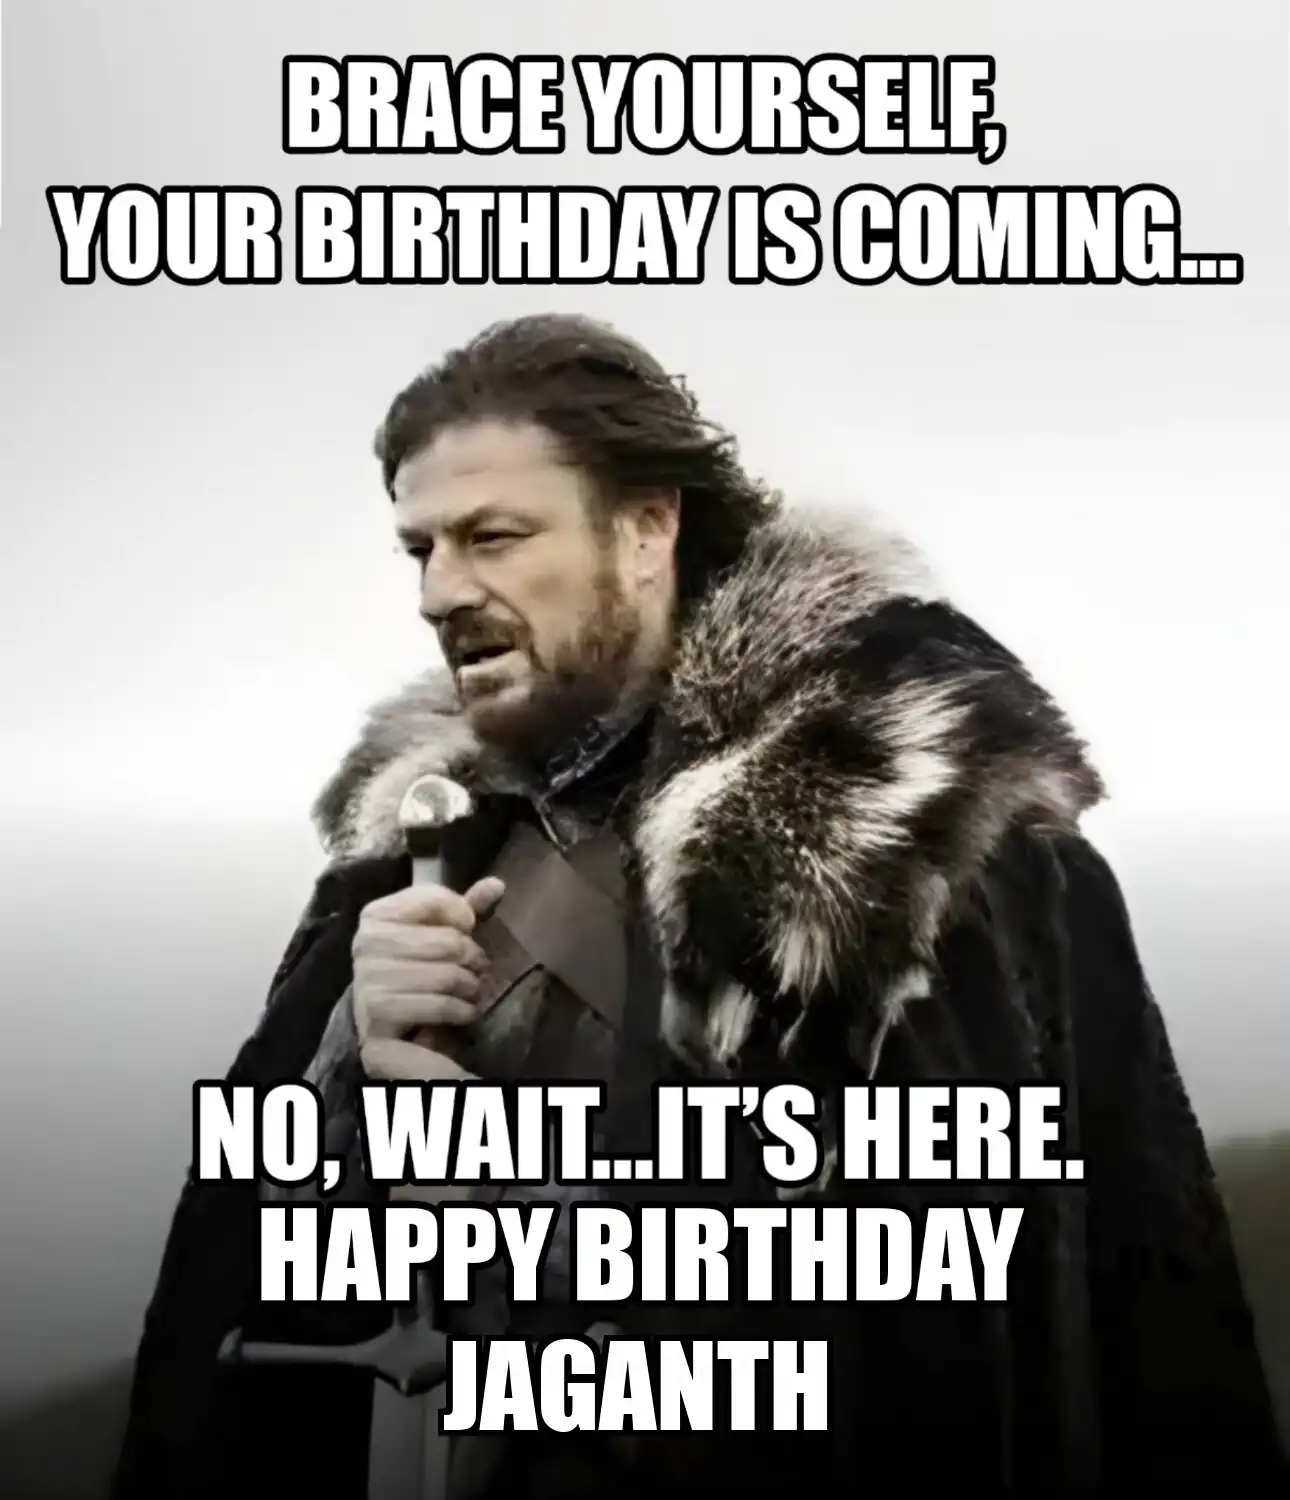 Happy Birthday Jaganth Brace Yourself Your Birthday Is Coming Meme